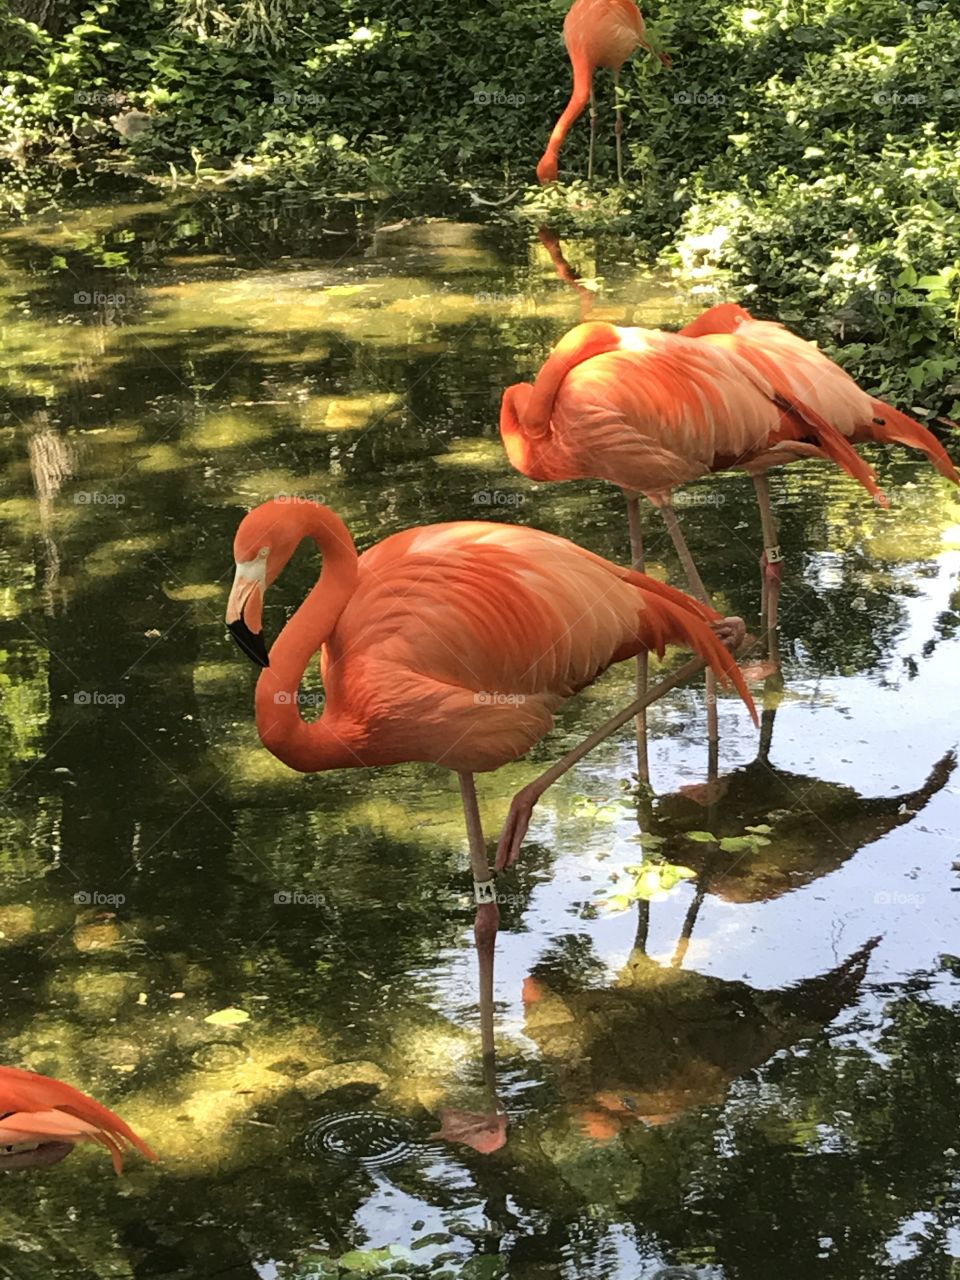 Resting Flamingo in the water